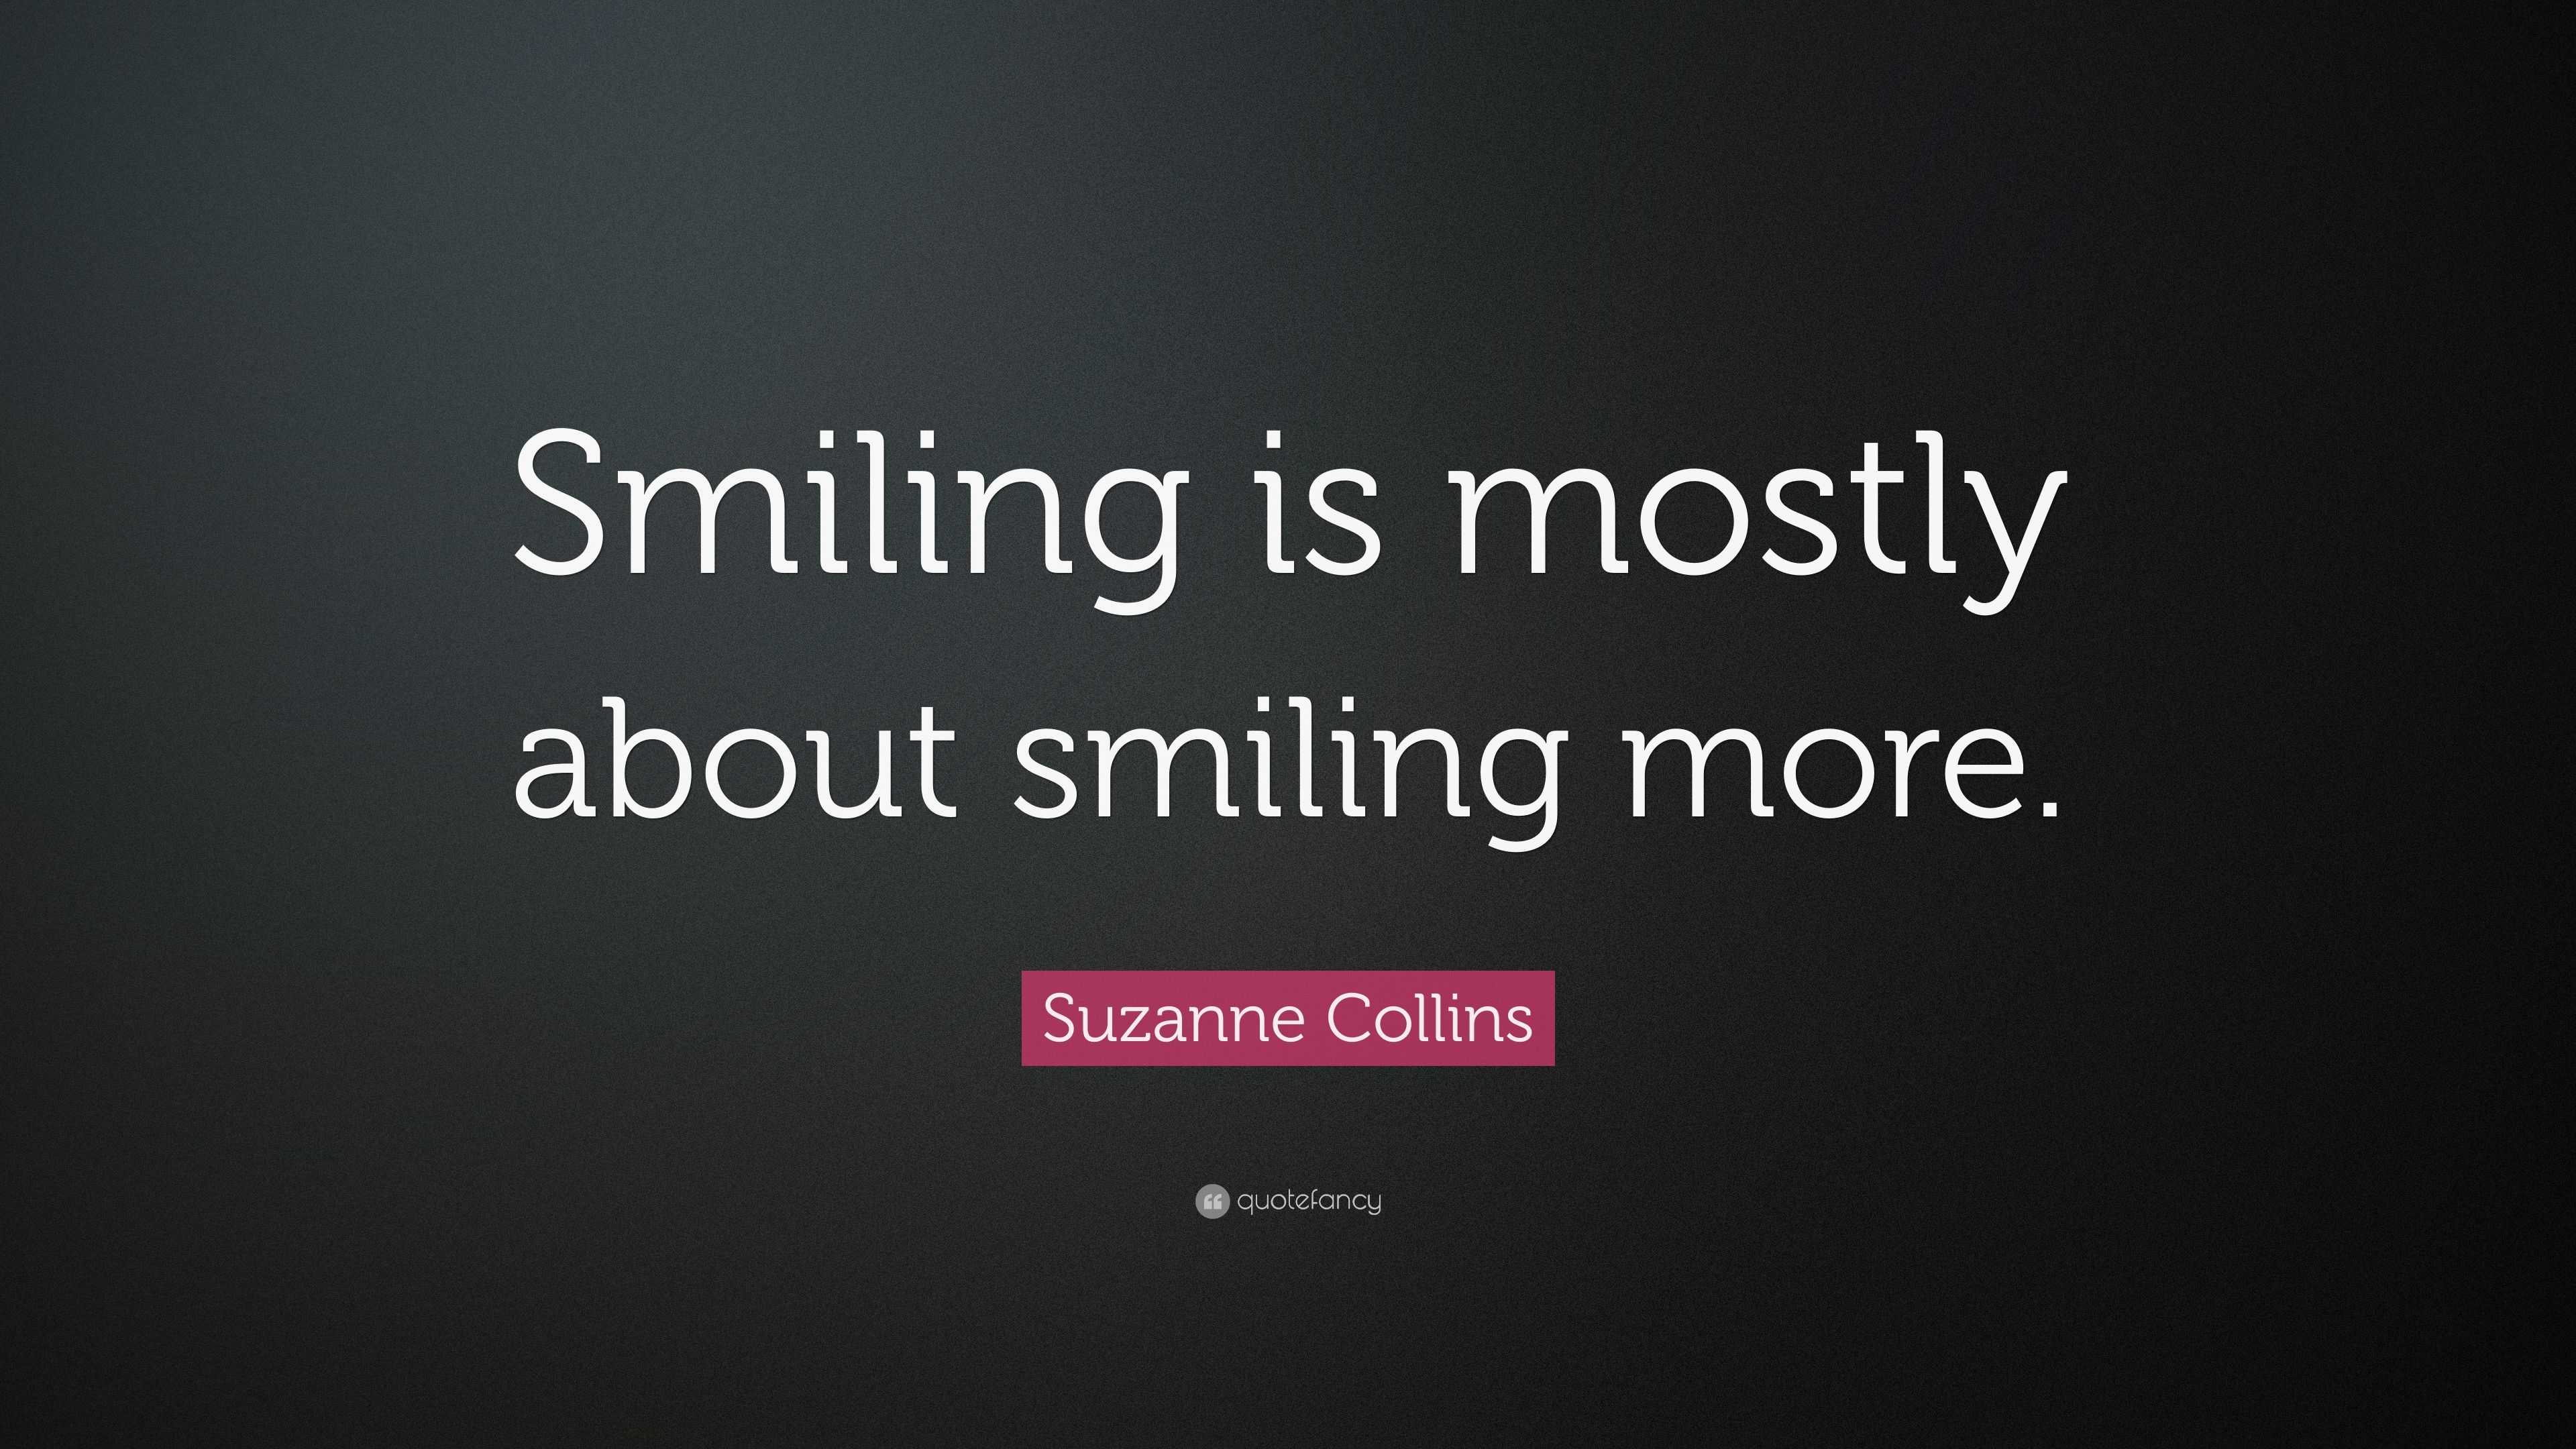 Suzanne Collins Quote: “Smiling is mostly about smiling more.”